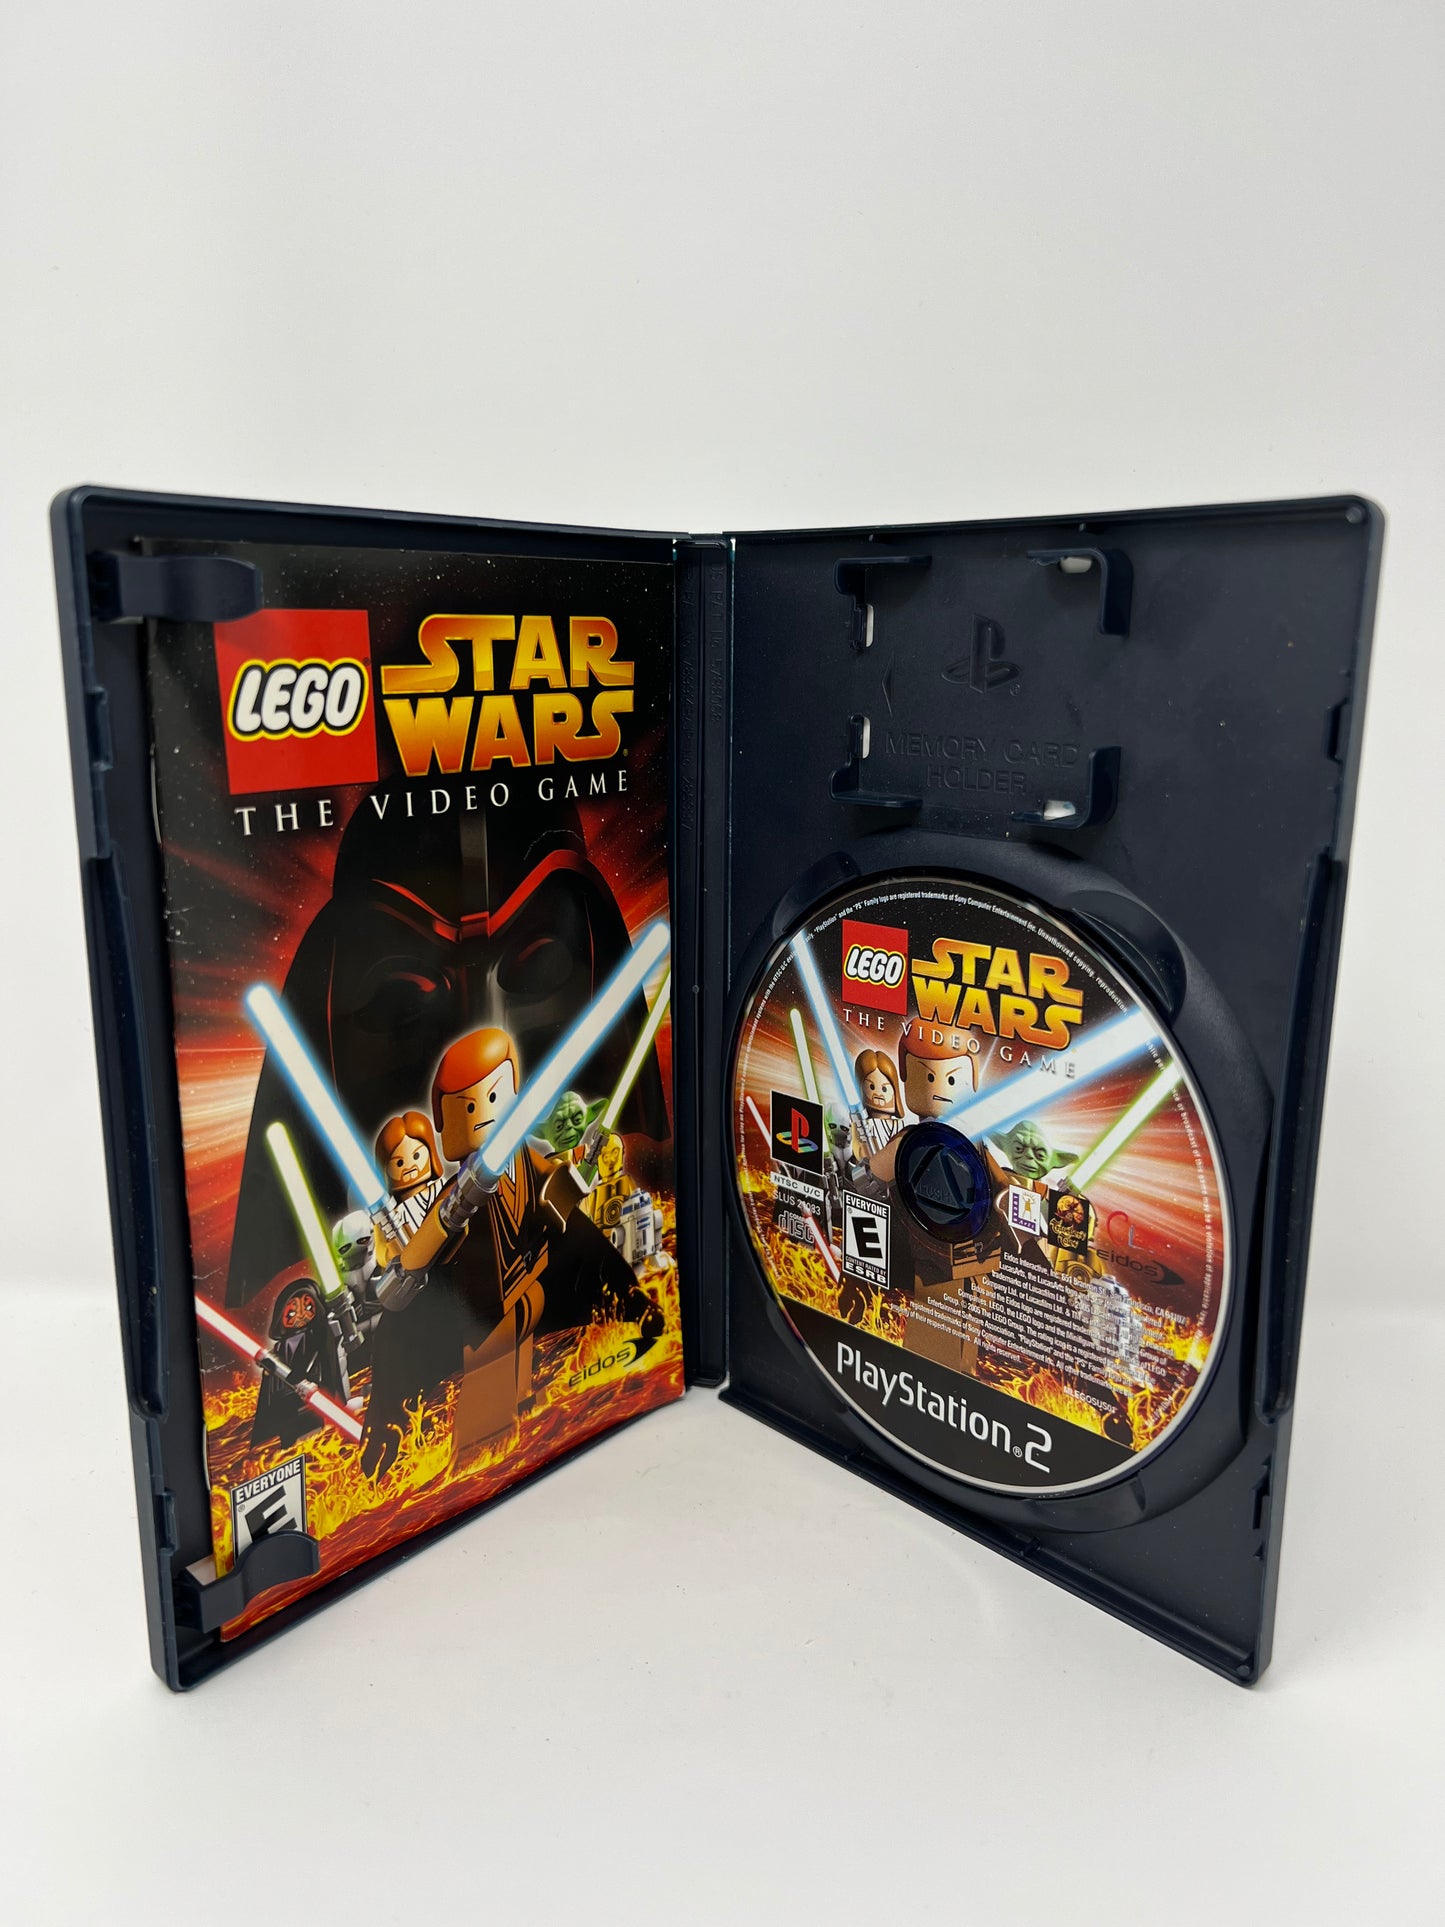 Lego Star Wars - PS2 Game - Used